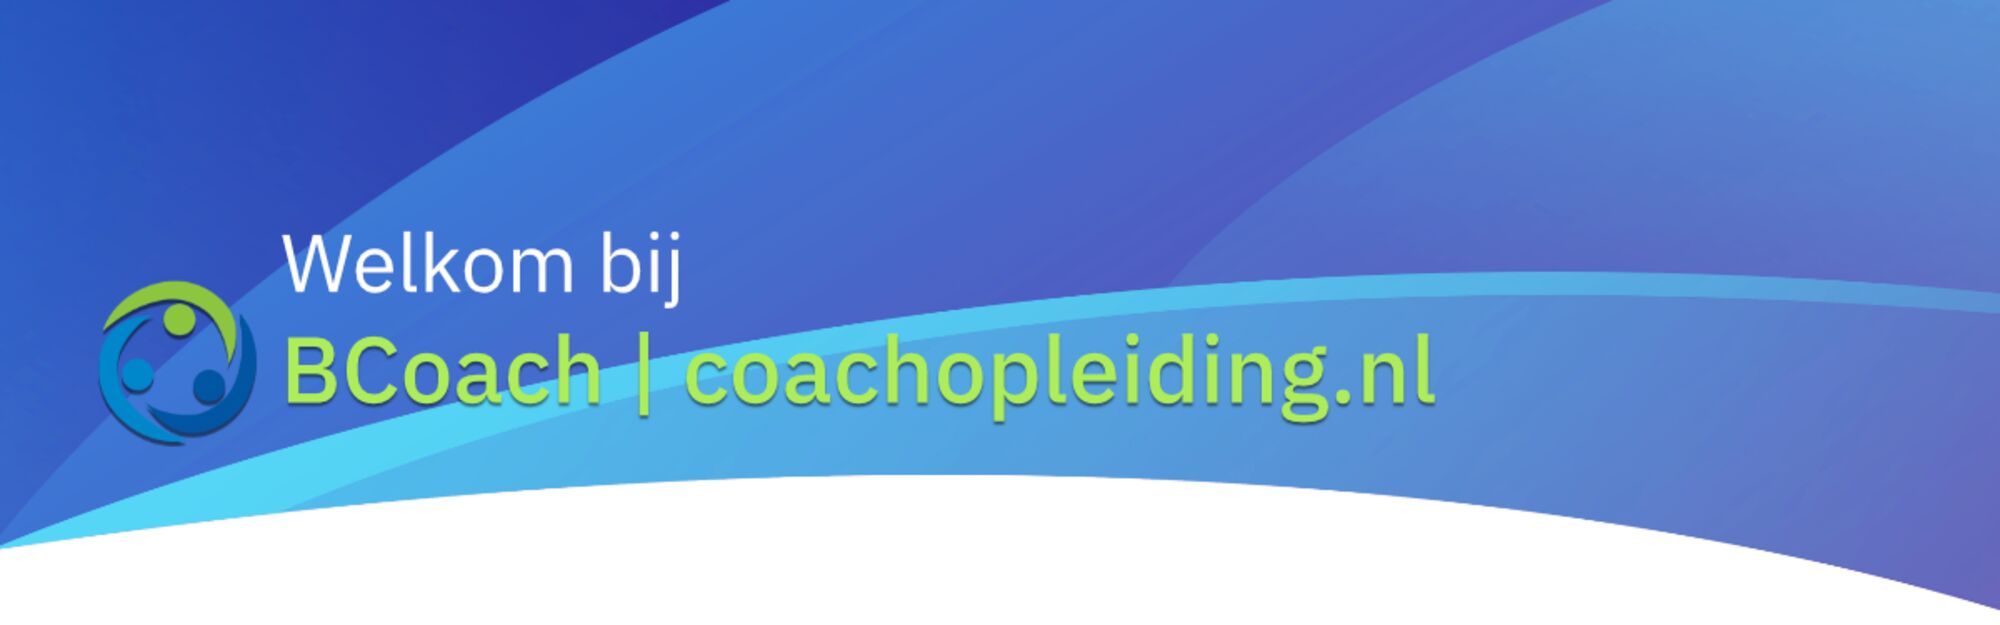 BG Bcoach.png